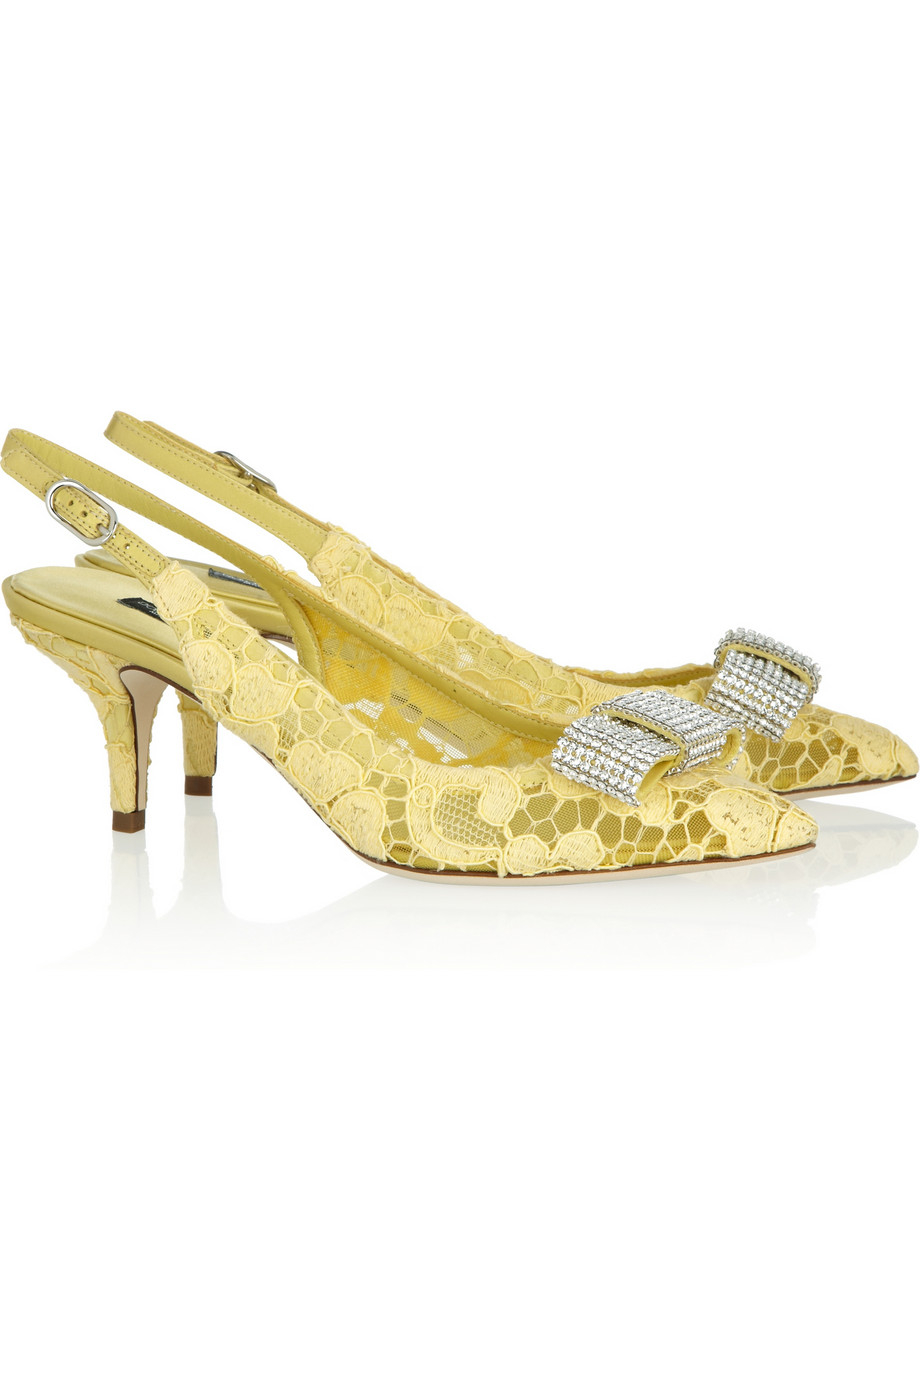 Lyst - Dolce & gabbana Crystal-Embellished Lace Slingback Pumps in Yellow